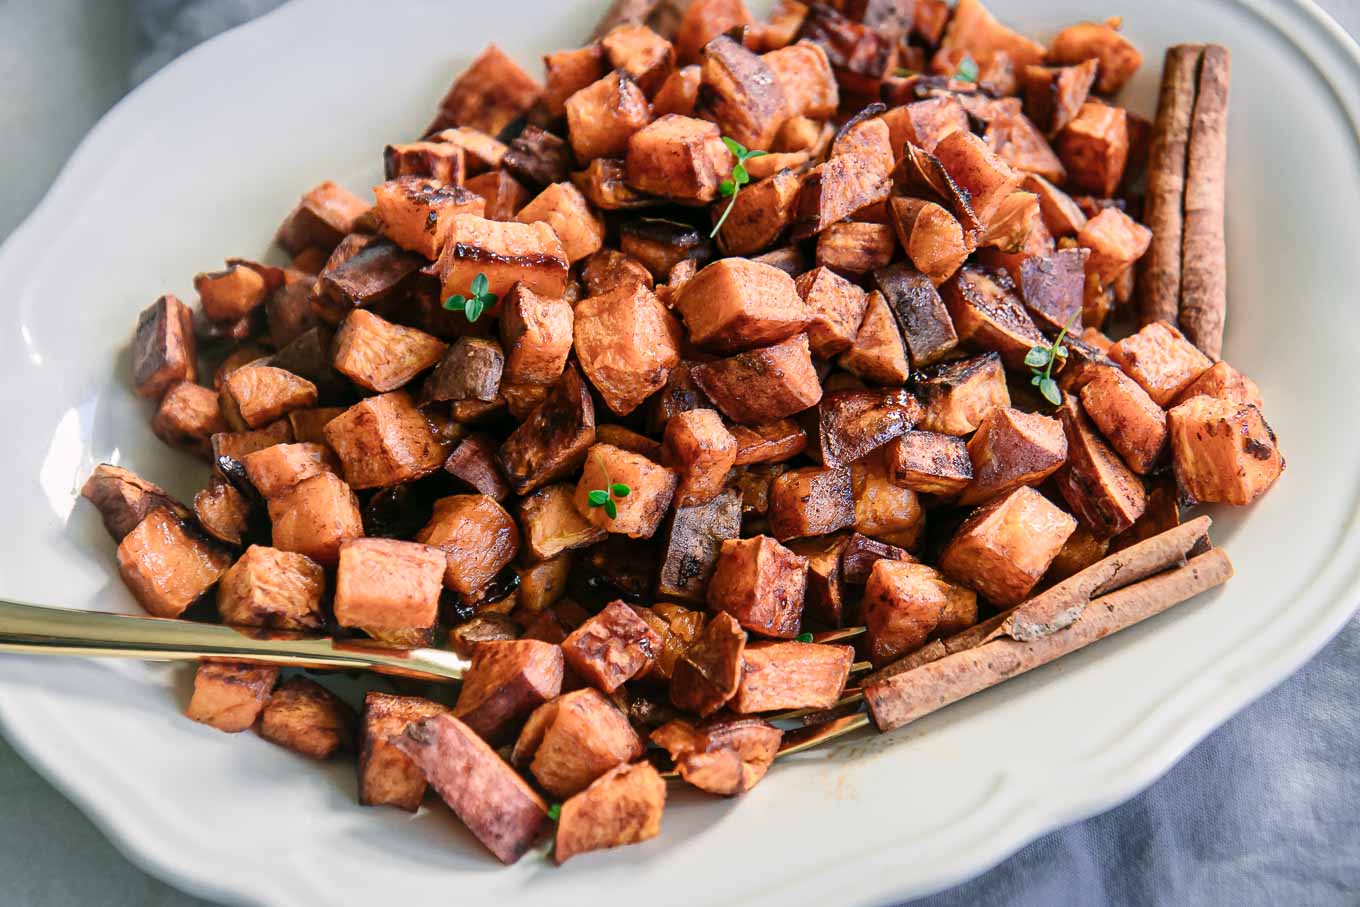 baked sweet potatoes on a white plate